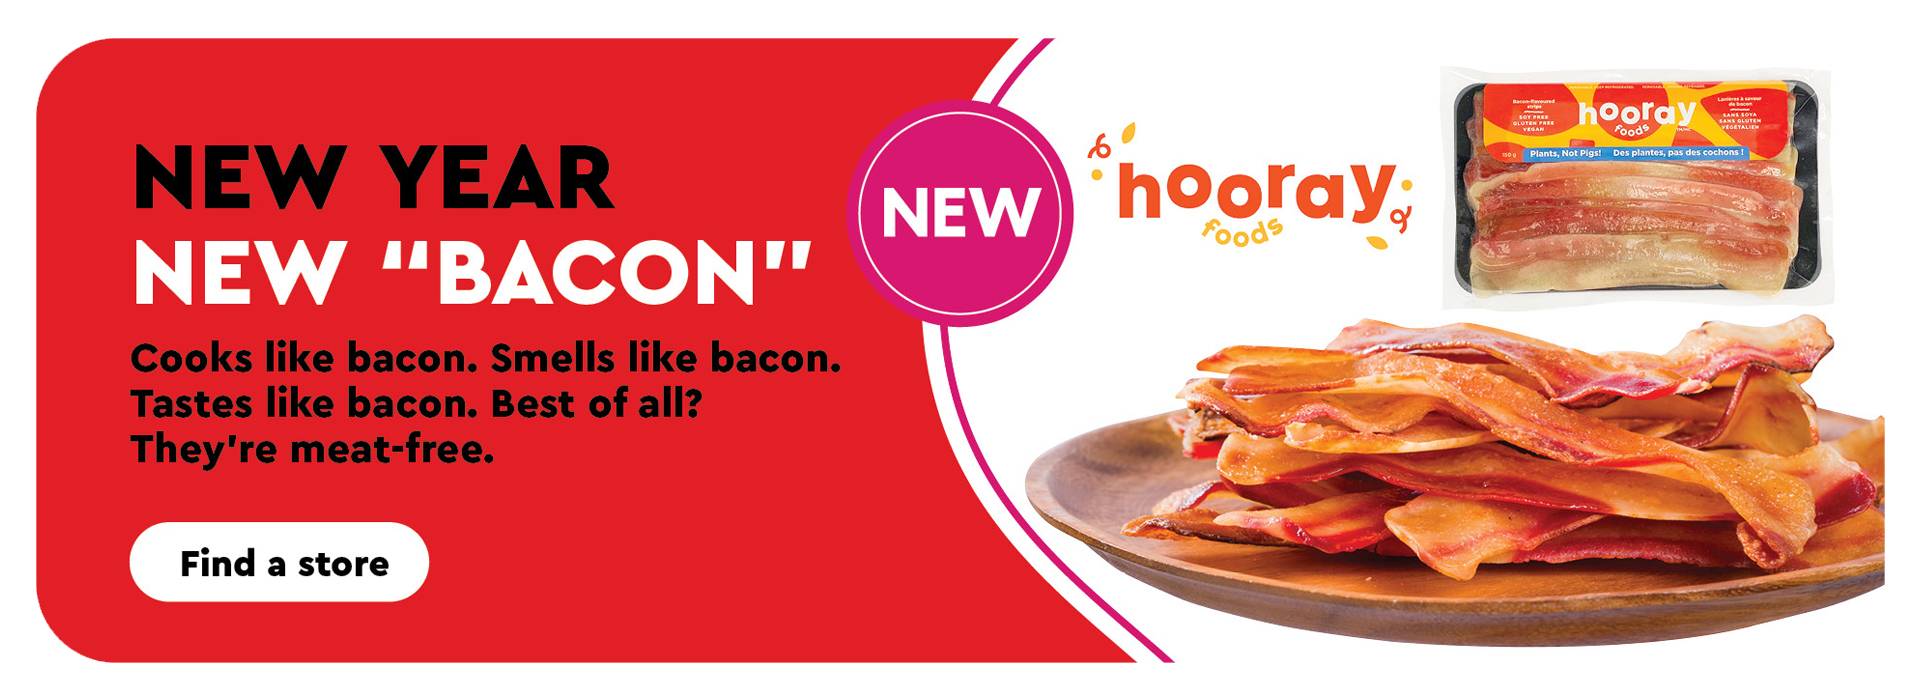 Text Reading 'New Year with New 'Bacon'. Try the Meat-free bacon. They cook like bacon, smells like bacon, best of all, they taste like bacon. Along with the 'Find a store' button below and some delicious-looking bacon strips by Hooray foods.